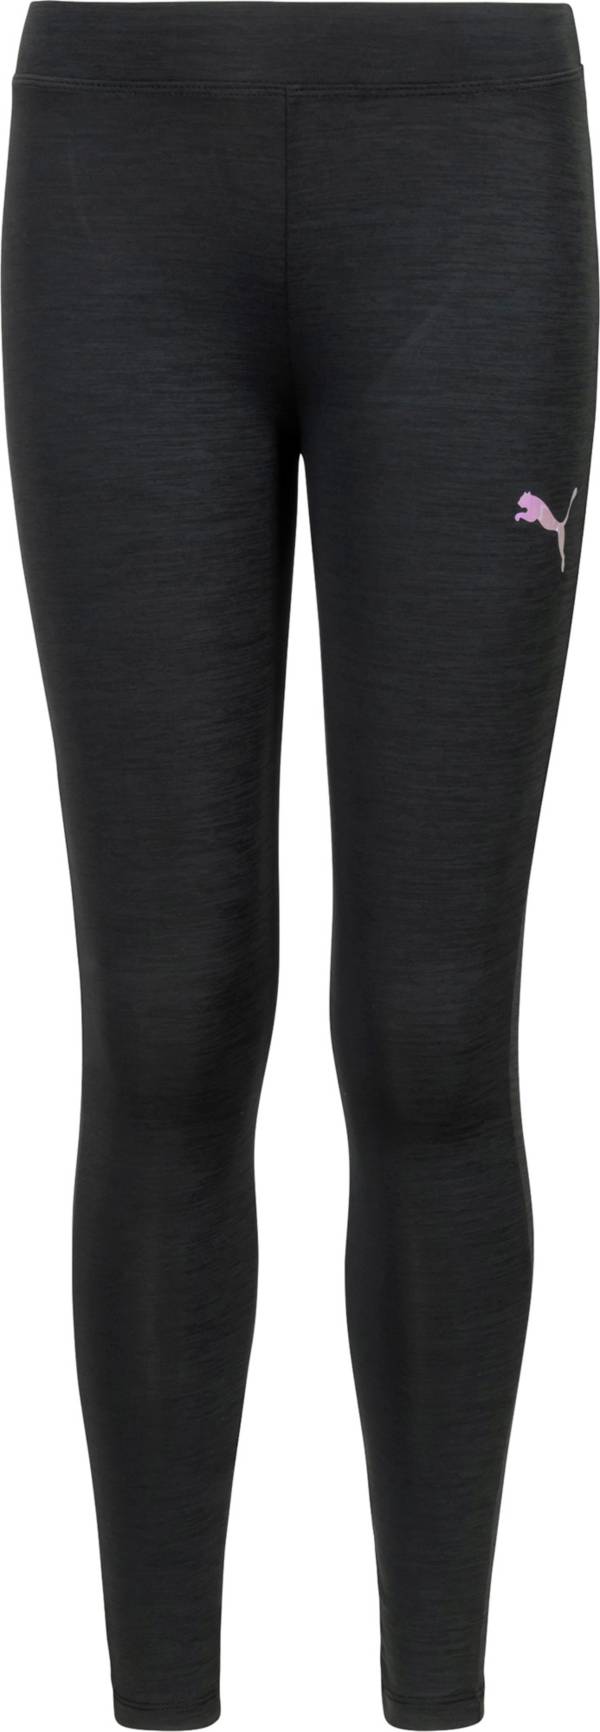 PUMA Girls' Core Pack Space Dyed Leggings product image